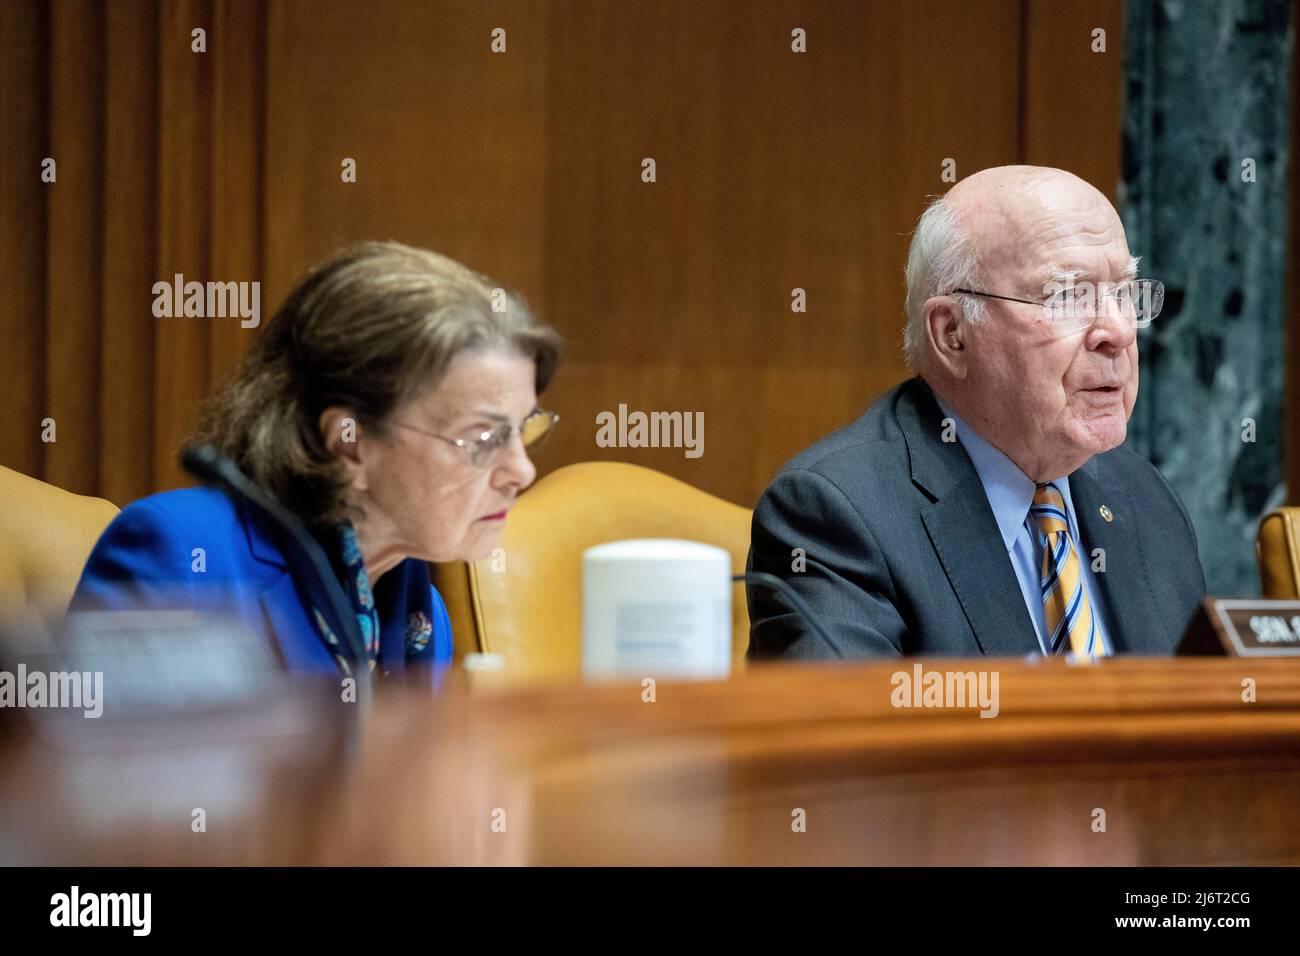 WASHINGTON, D.C. - May 3: United States Senator Dianne Feinstein (Democrat of California), left, and US Senator Patrick Leahy (Democrat of Vermont), attend a Senate appropriations hearing in the defense subcommittee the Capitol in Washington, on Tuesday, May 3, 2022. Credit: Amanda Andrade-Rhoades / Pool via CNP Stock Photo